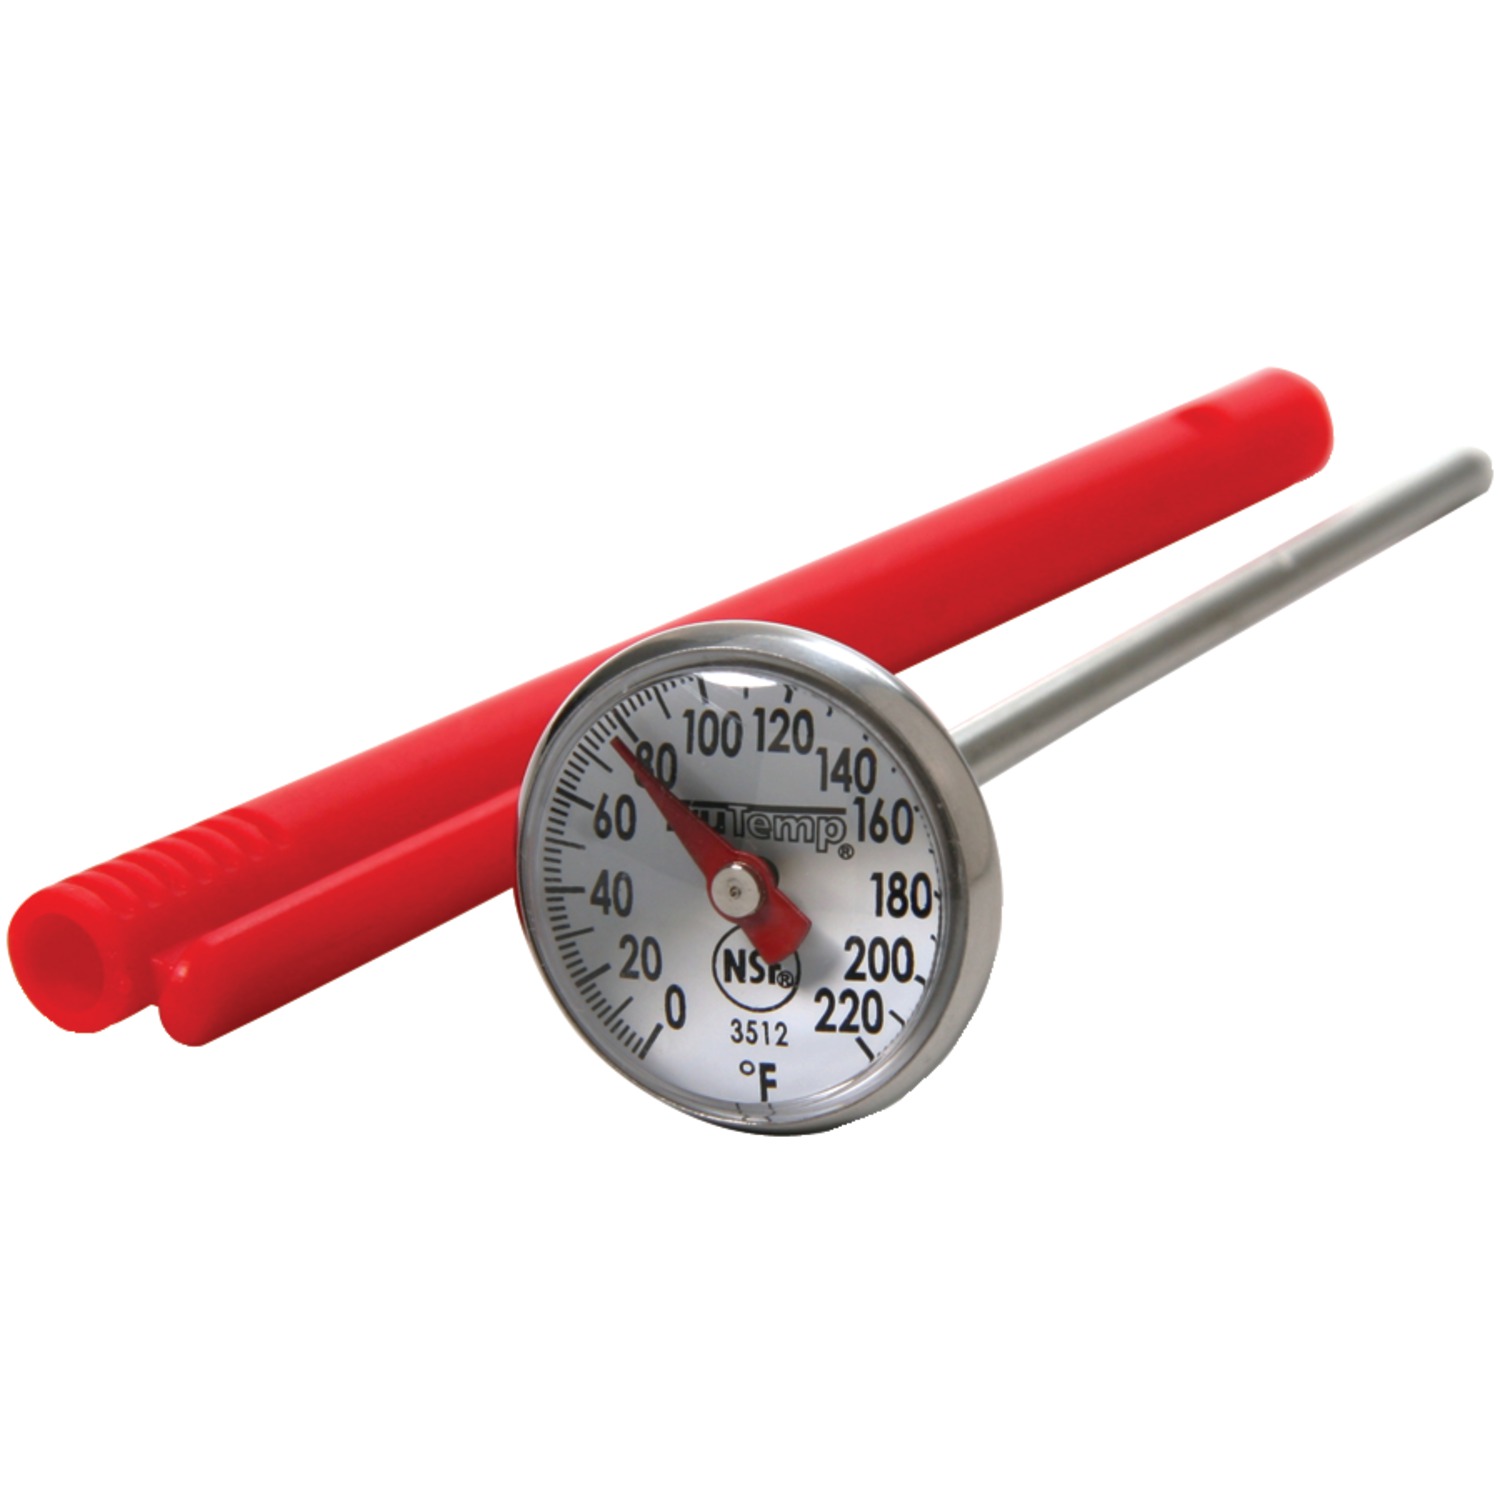 TAYLOR 3512 Multi-Use Instant Read Thermometer 0 to 220 deg F Analog Display Gray - image 1 of 2